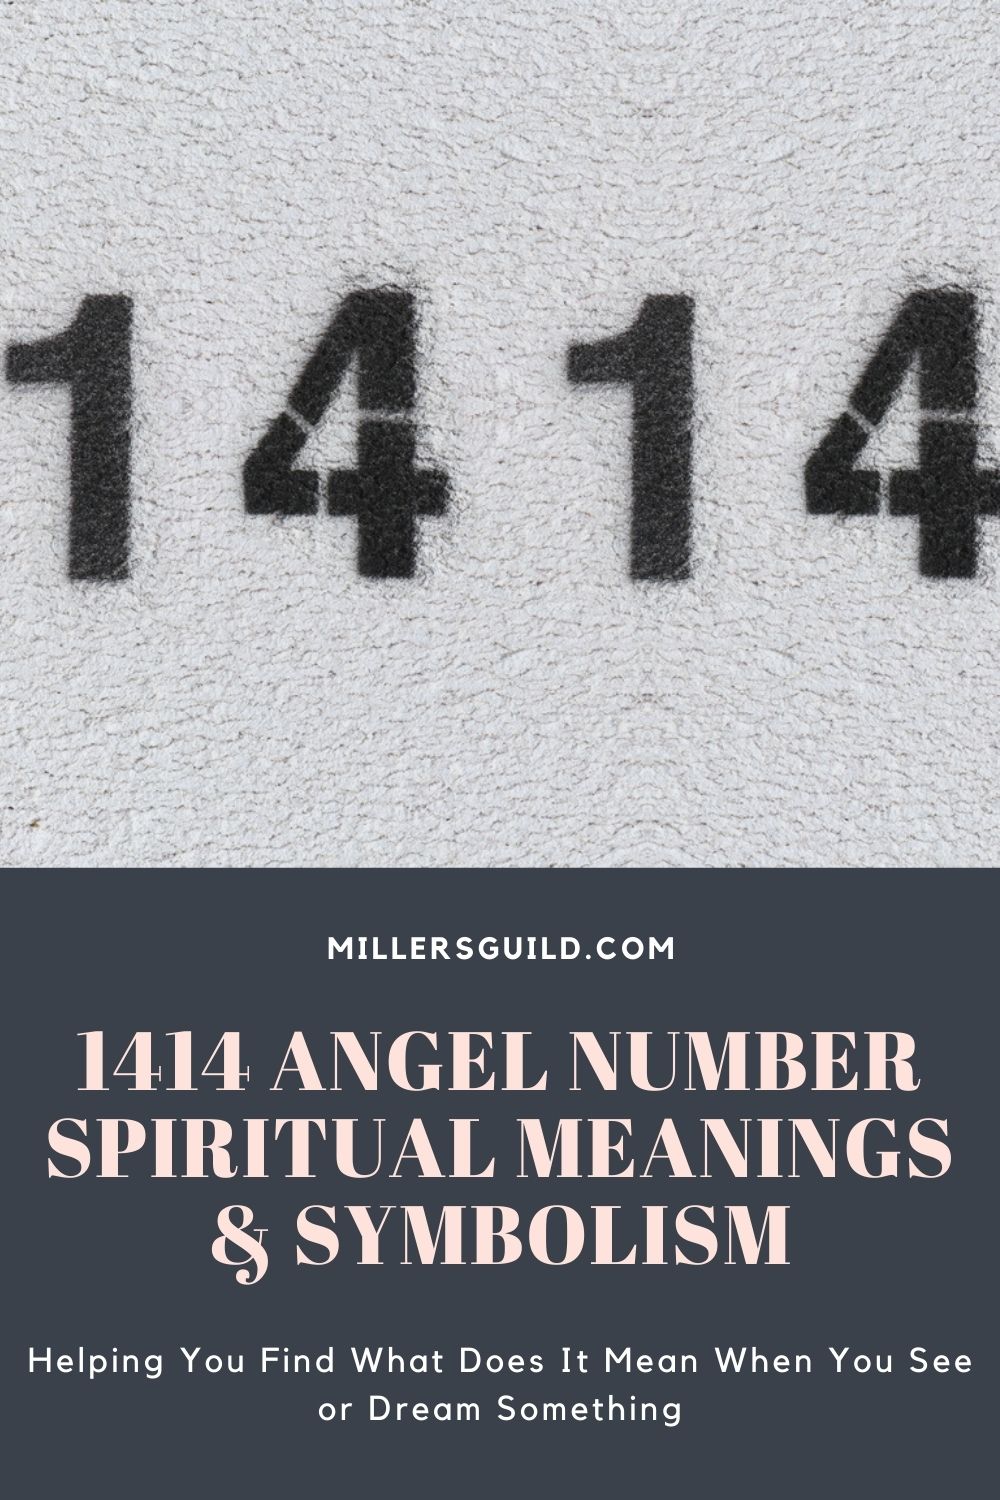 1414 Angel Number Spiritual Meanings & Symbolism 2